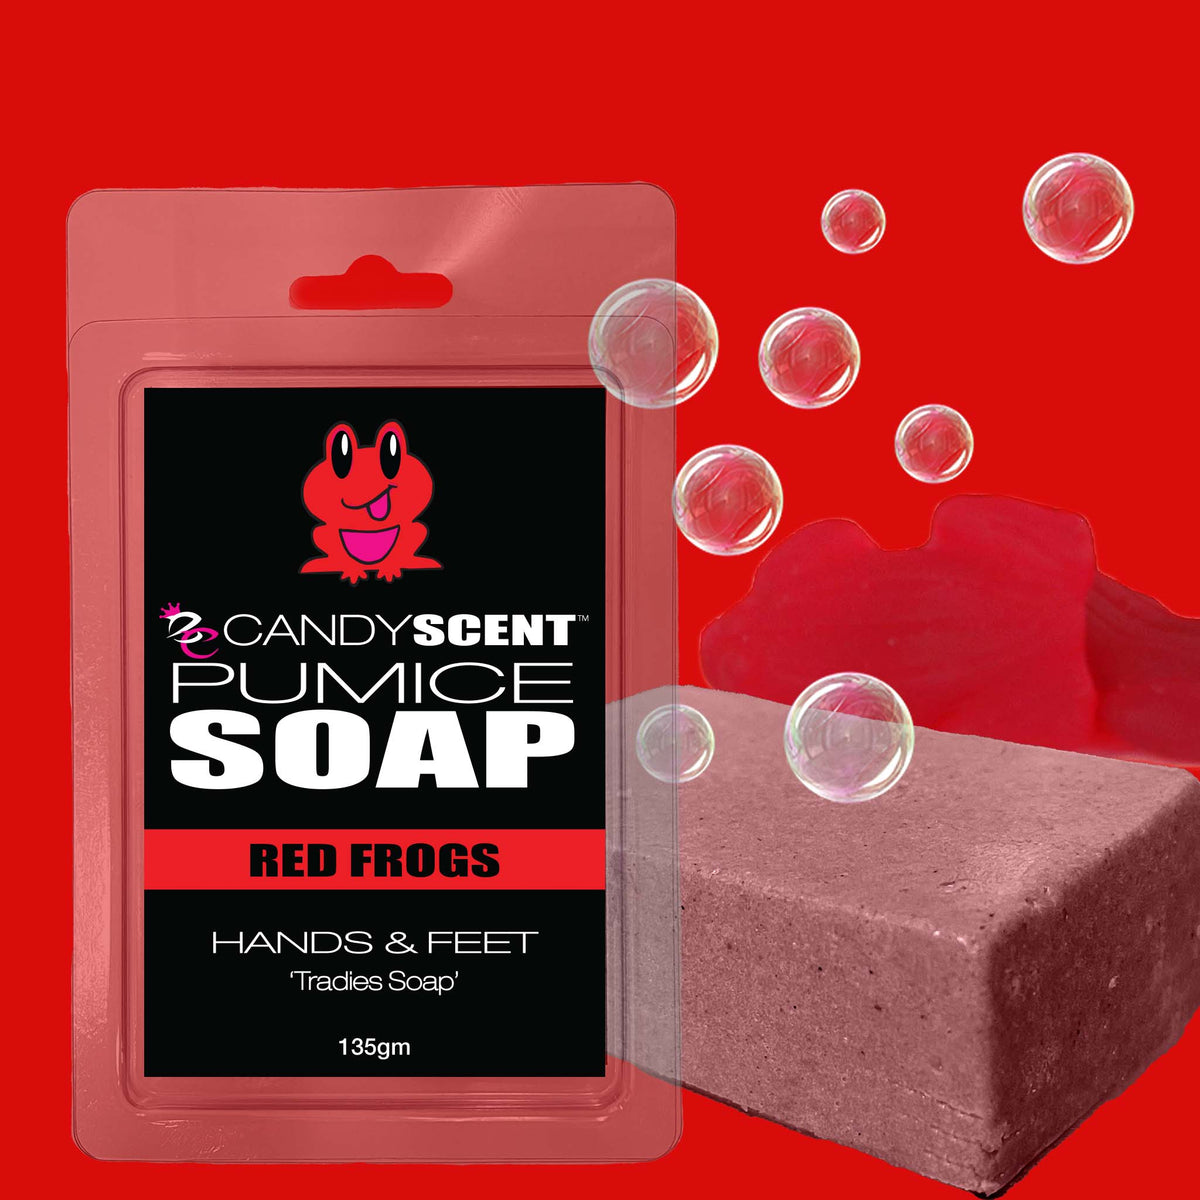 RED FROGS Pumice Soap